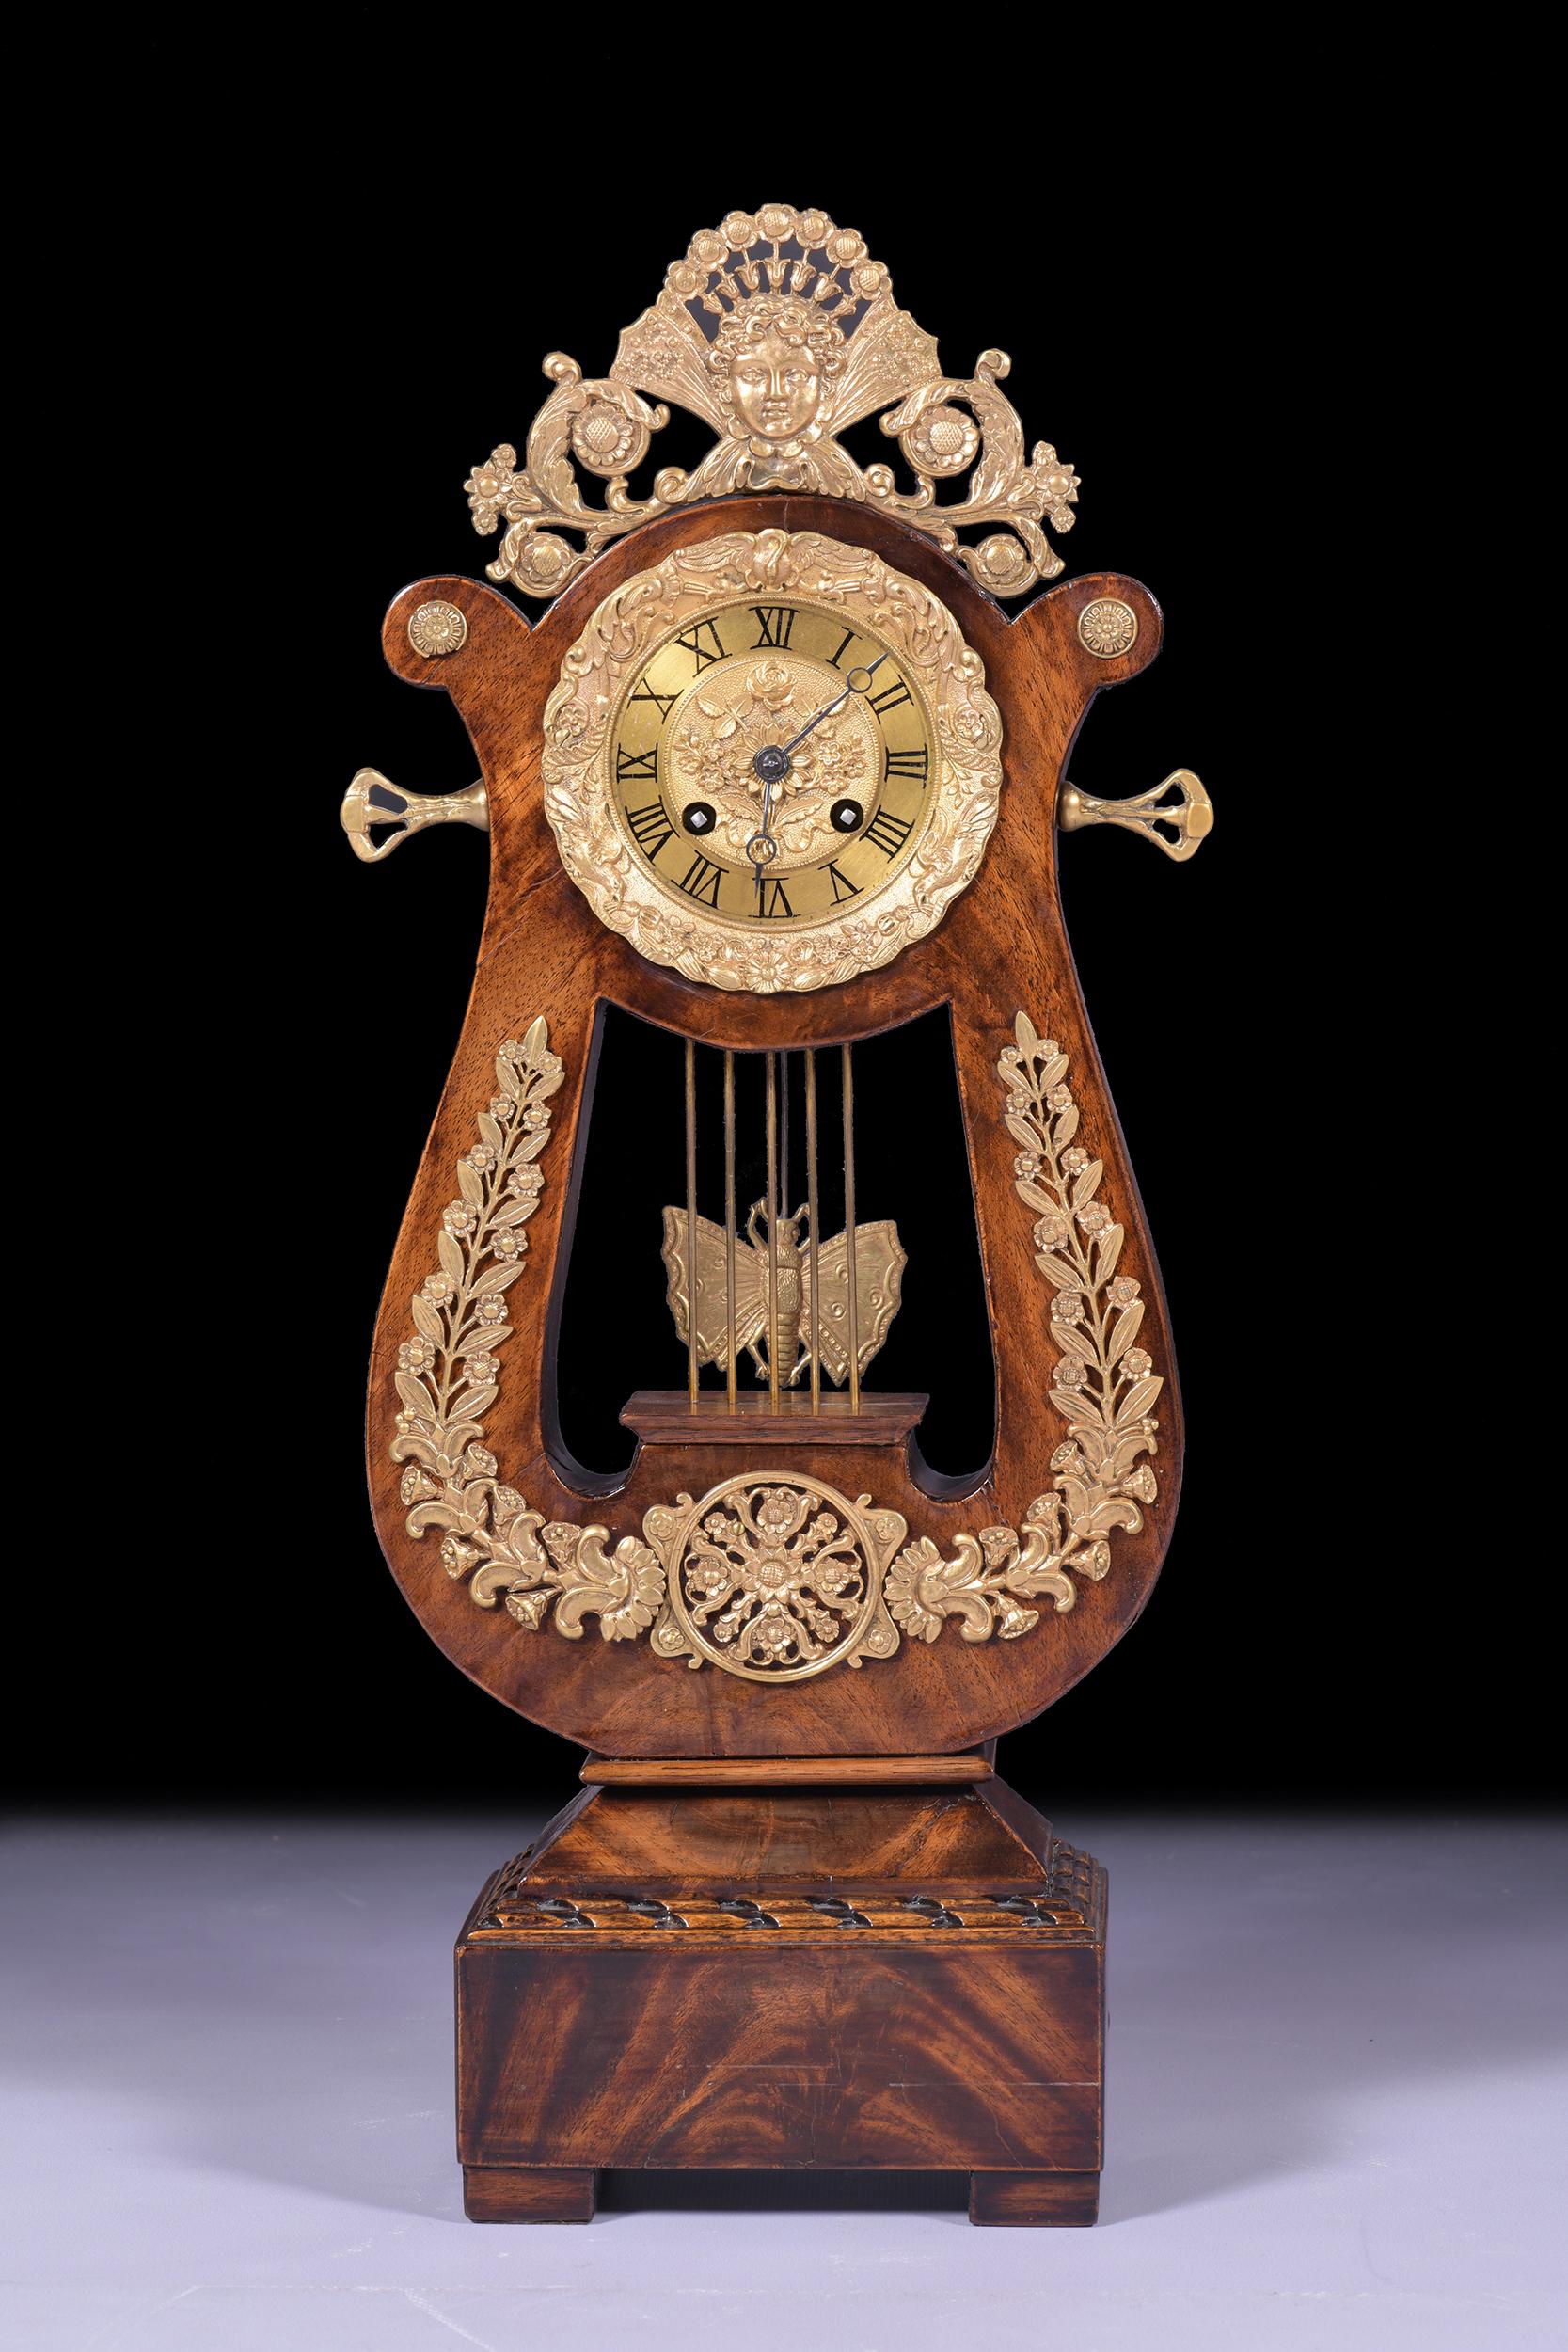 A very fine and attractive French Lyre mantel clock by Ponds of Paris in ormolu mounted mahogany. The clock, set on a rectangular base sitting upon four ball feet. The arms of the lyre in well figured mahogany and with applied ormolu mounts of